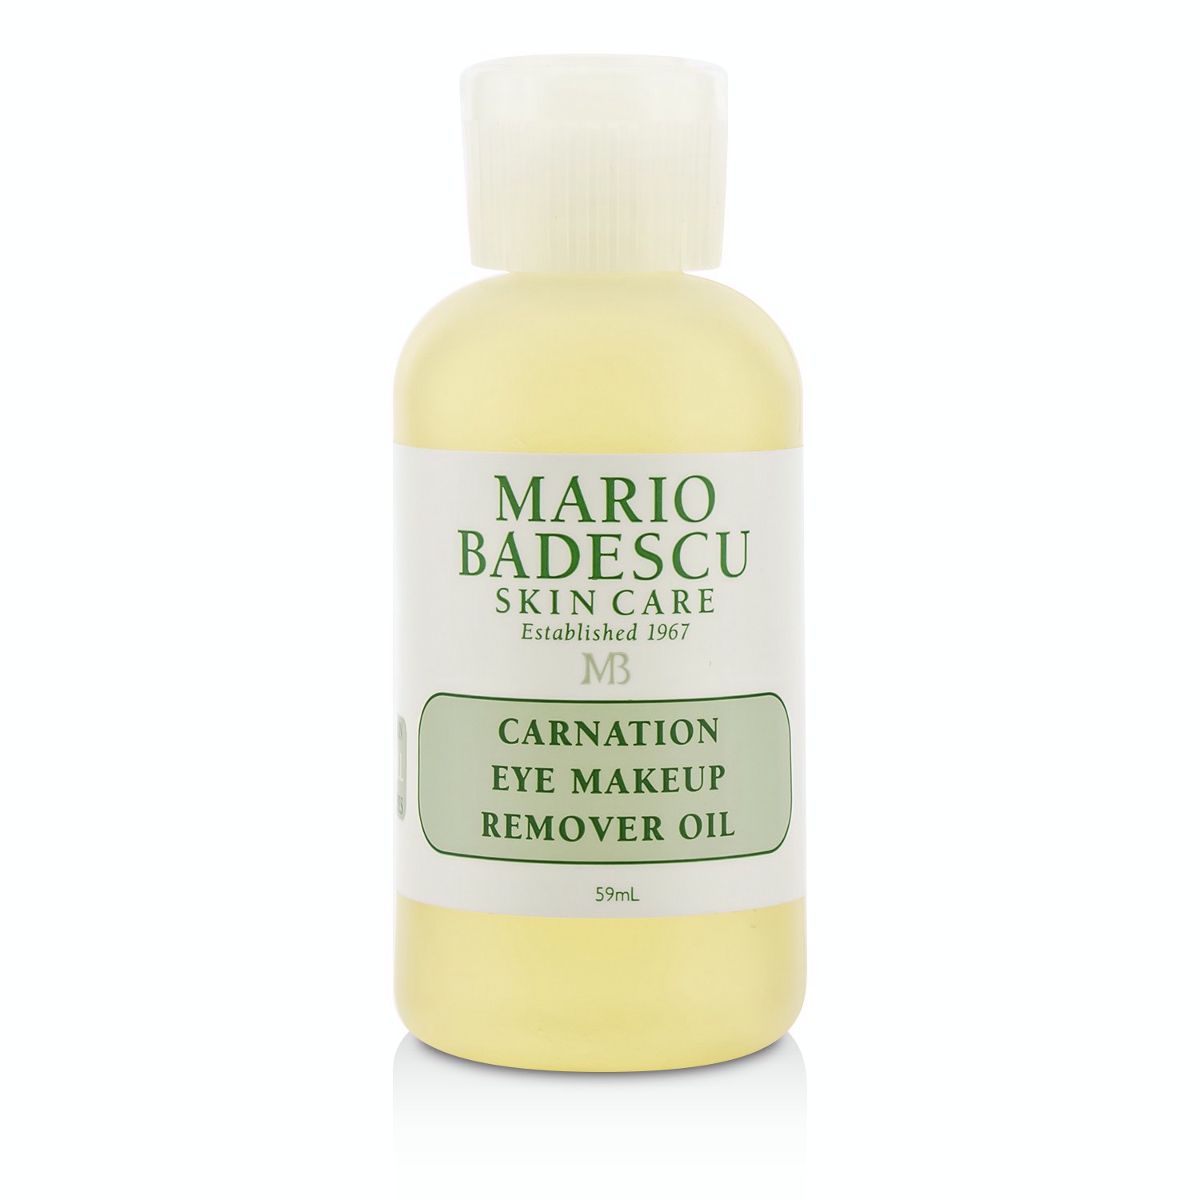 Carnation Eye Make-Up Remover Oil - For All Skin Types Mario Badescu Image